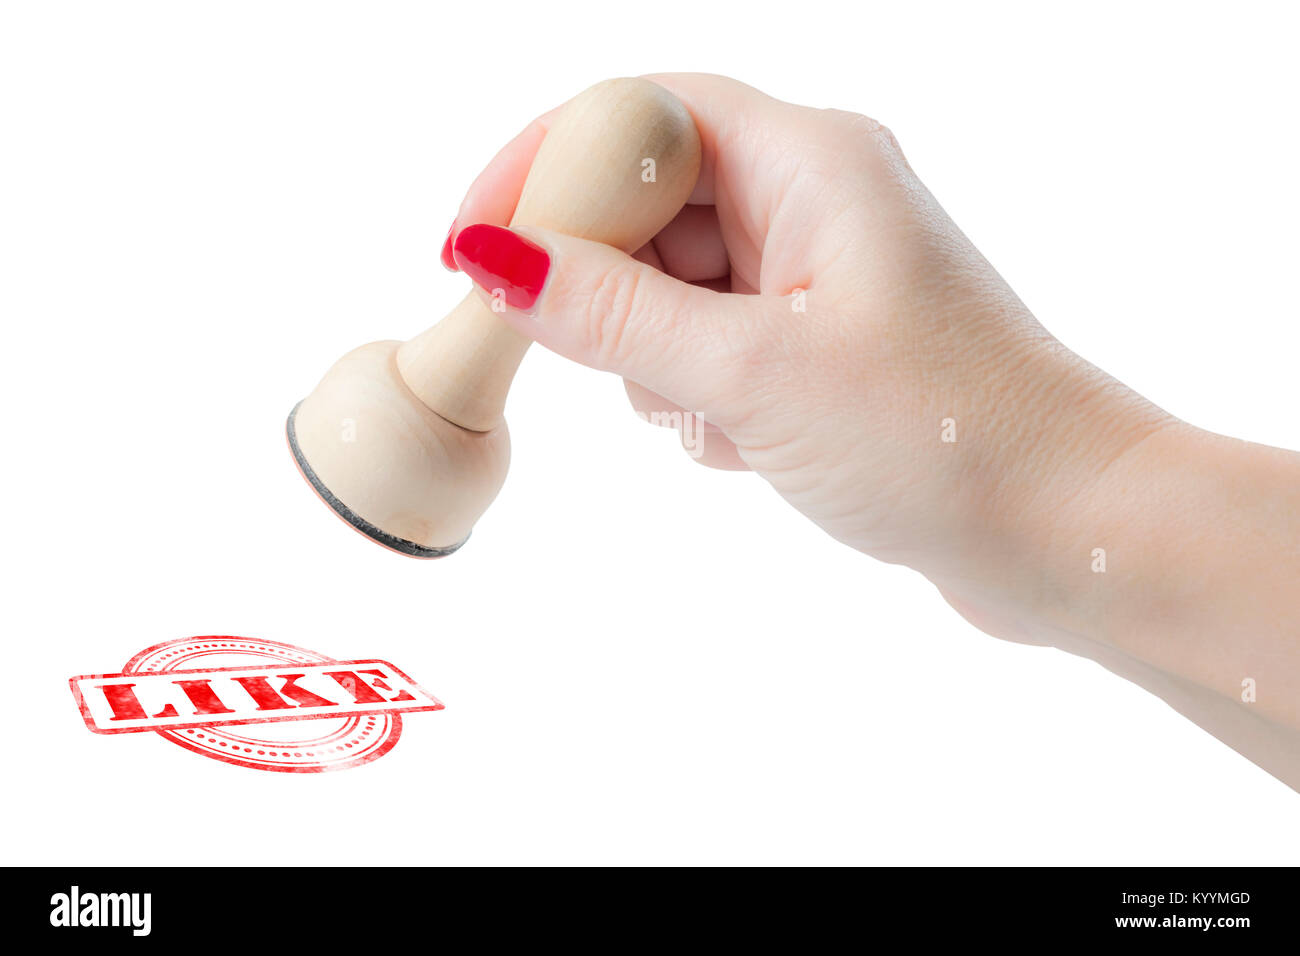 Hand holding a rubber stamp with the word like isolated on a white background Stock Photo